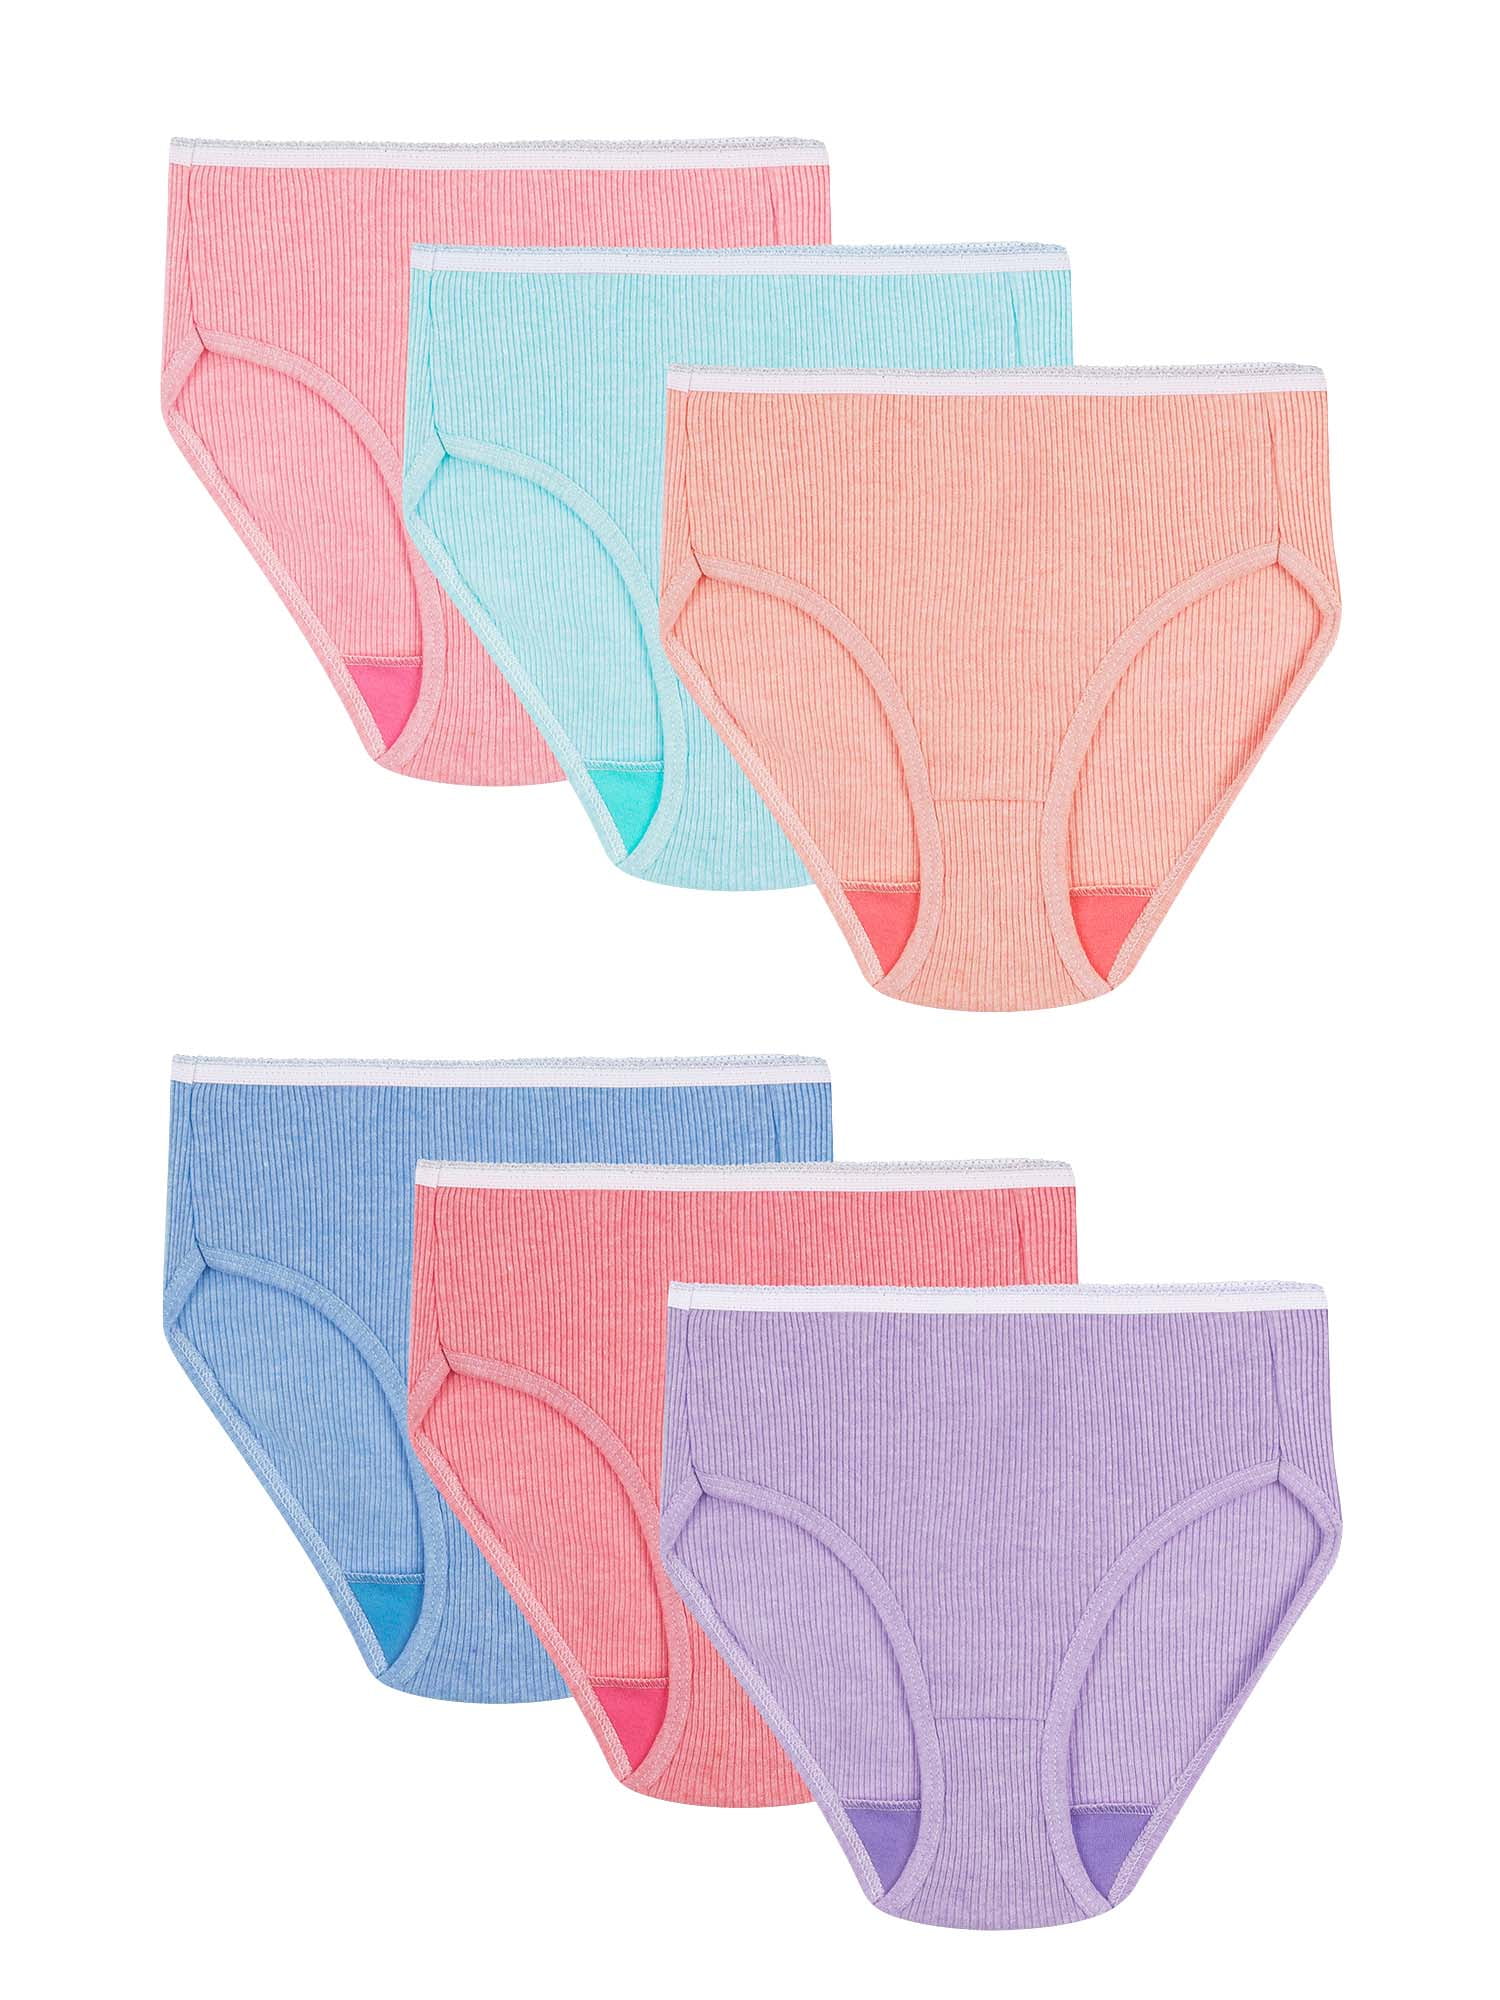 Hanes Girls' Tagless Ribbed Brief, 6 Pack, Sizes 6-16